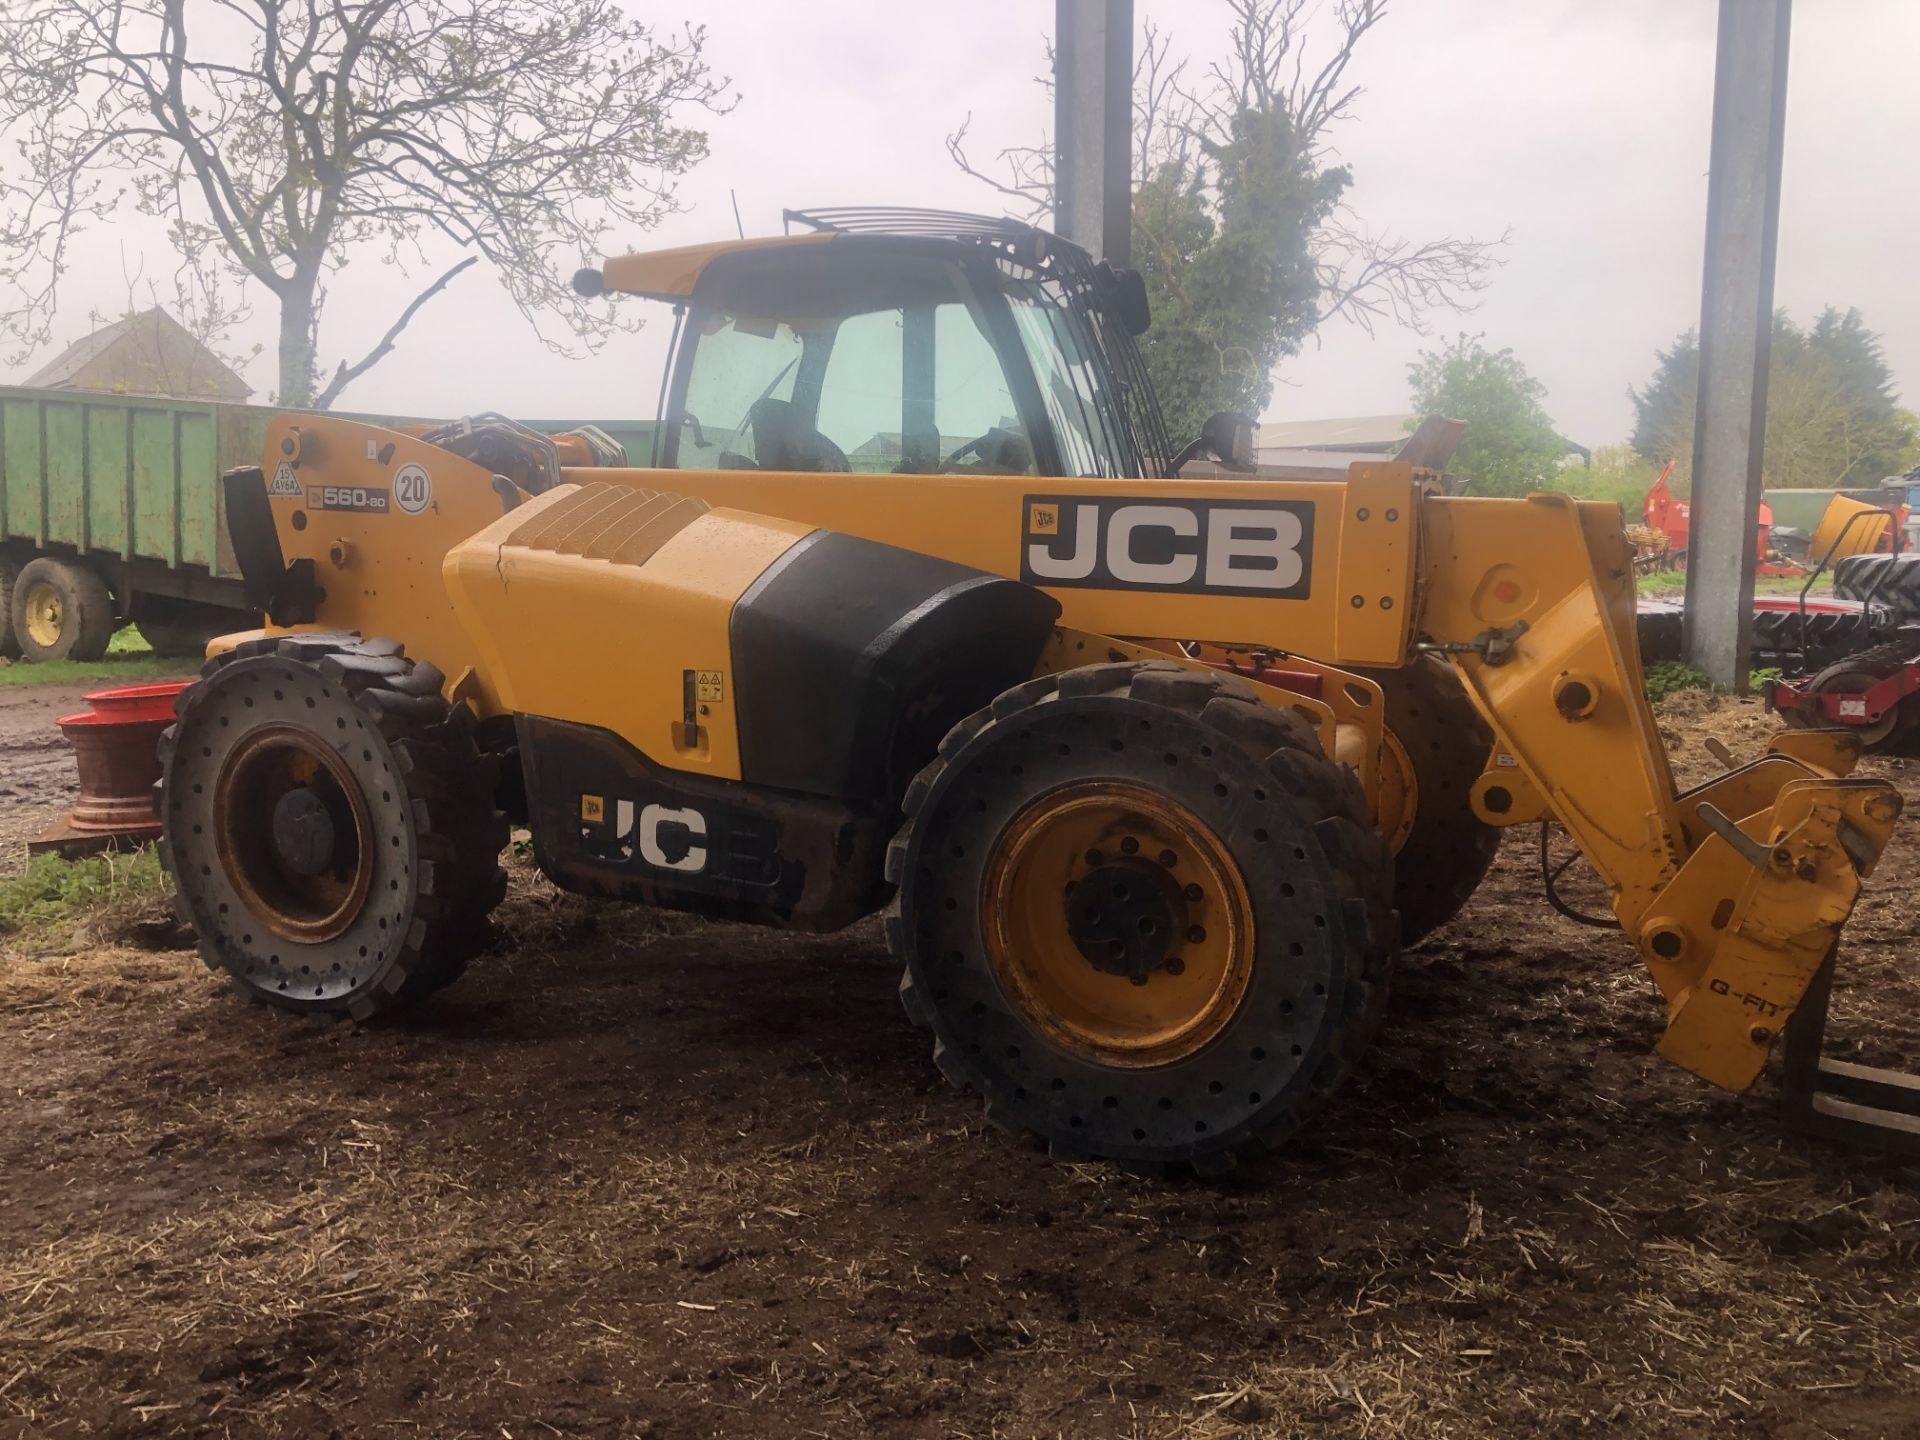 JCB 560-80 Wastemaster four wheel drive & steer Telescopic Handler c/w air conditioned cab, 13.